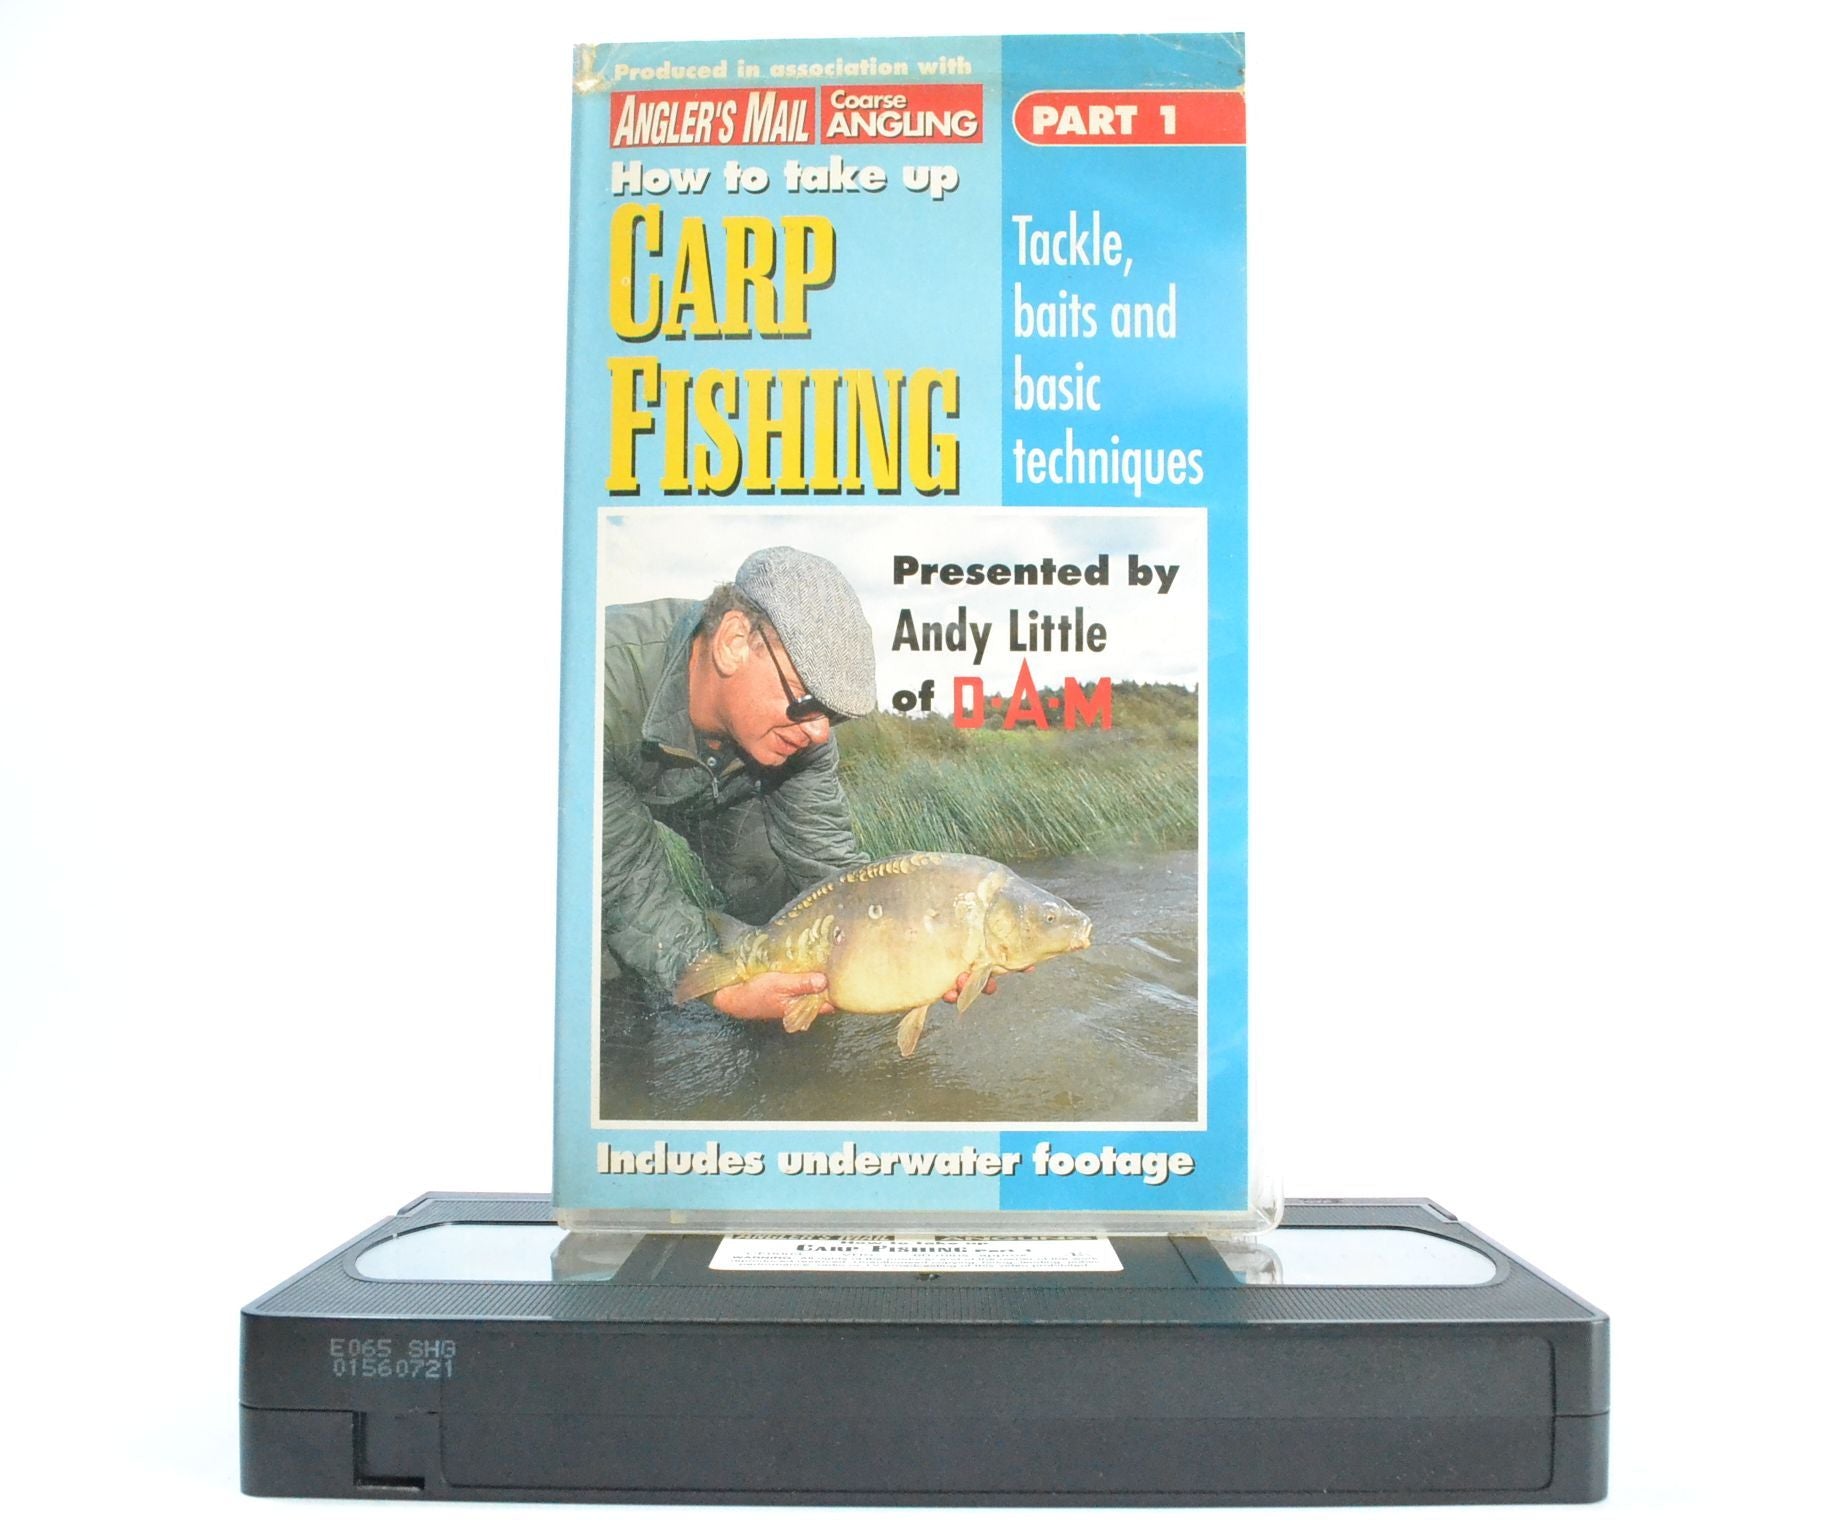 How To Take Up Carp Fishing: Tackle Baits & Basic Techniques - Andy Little VHS-